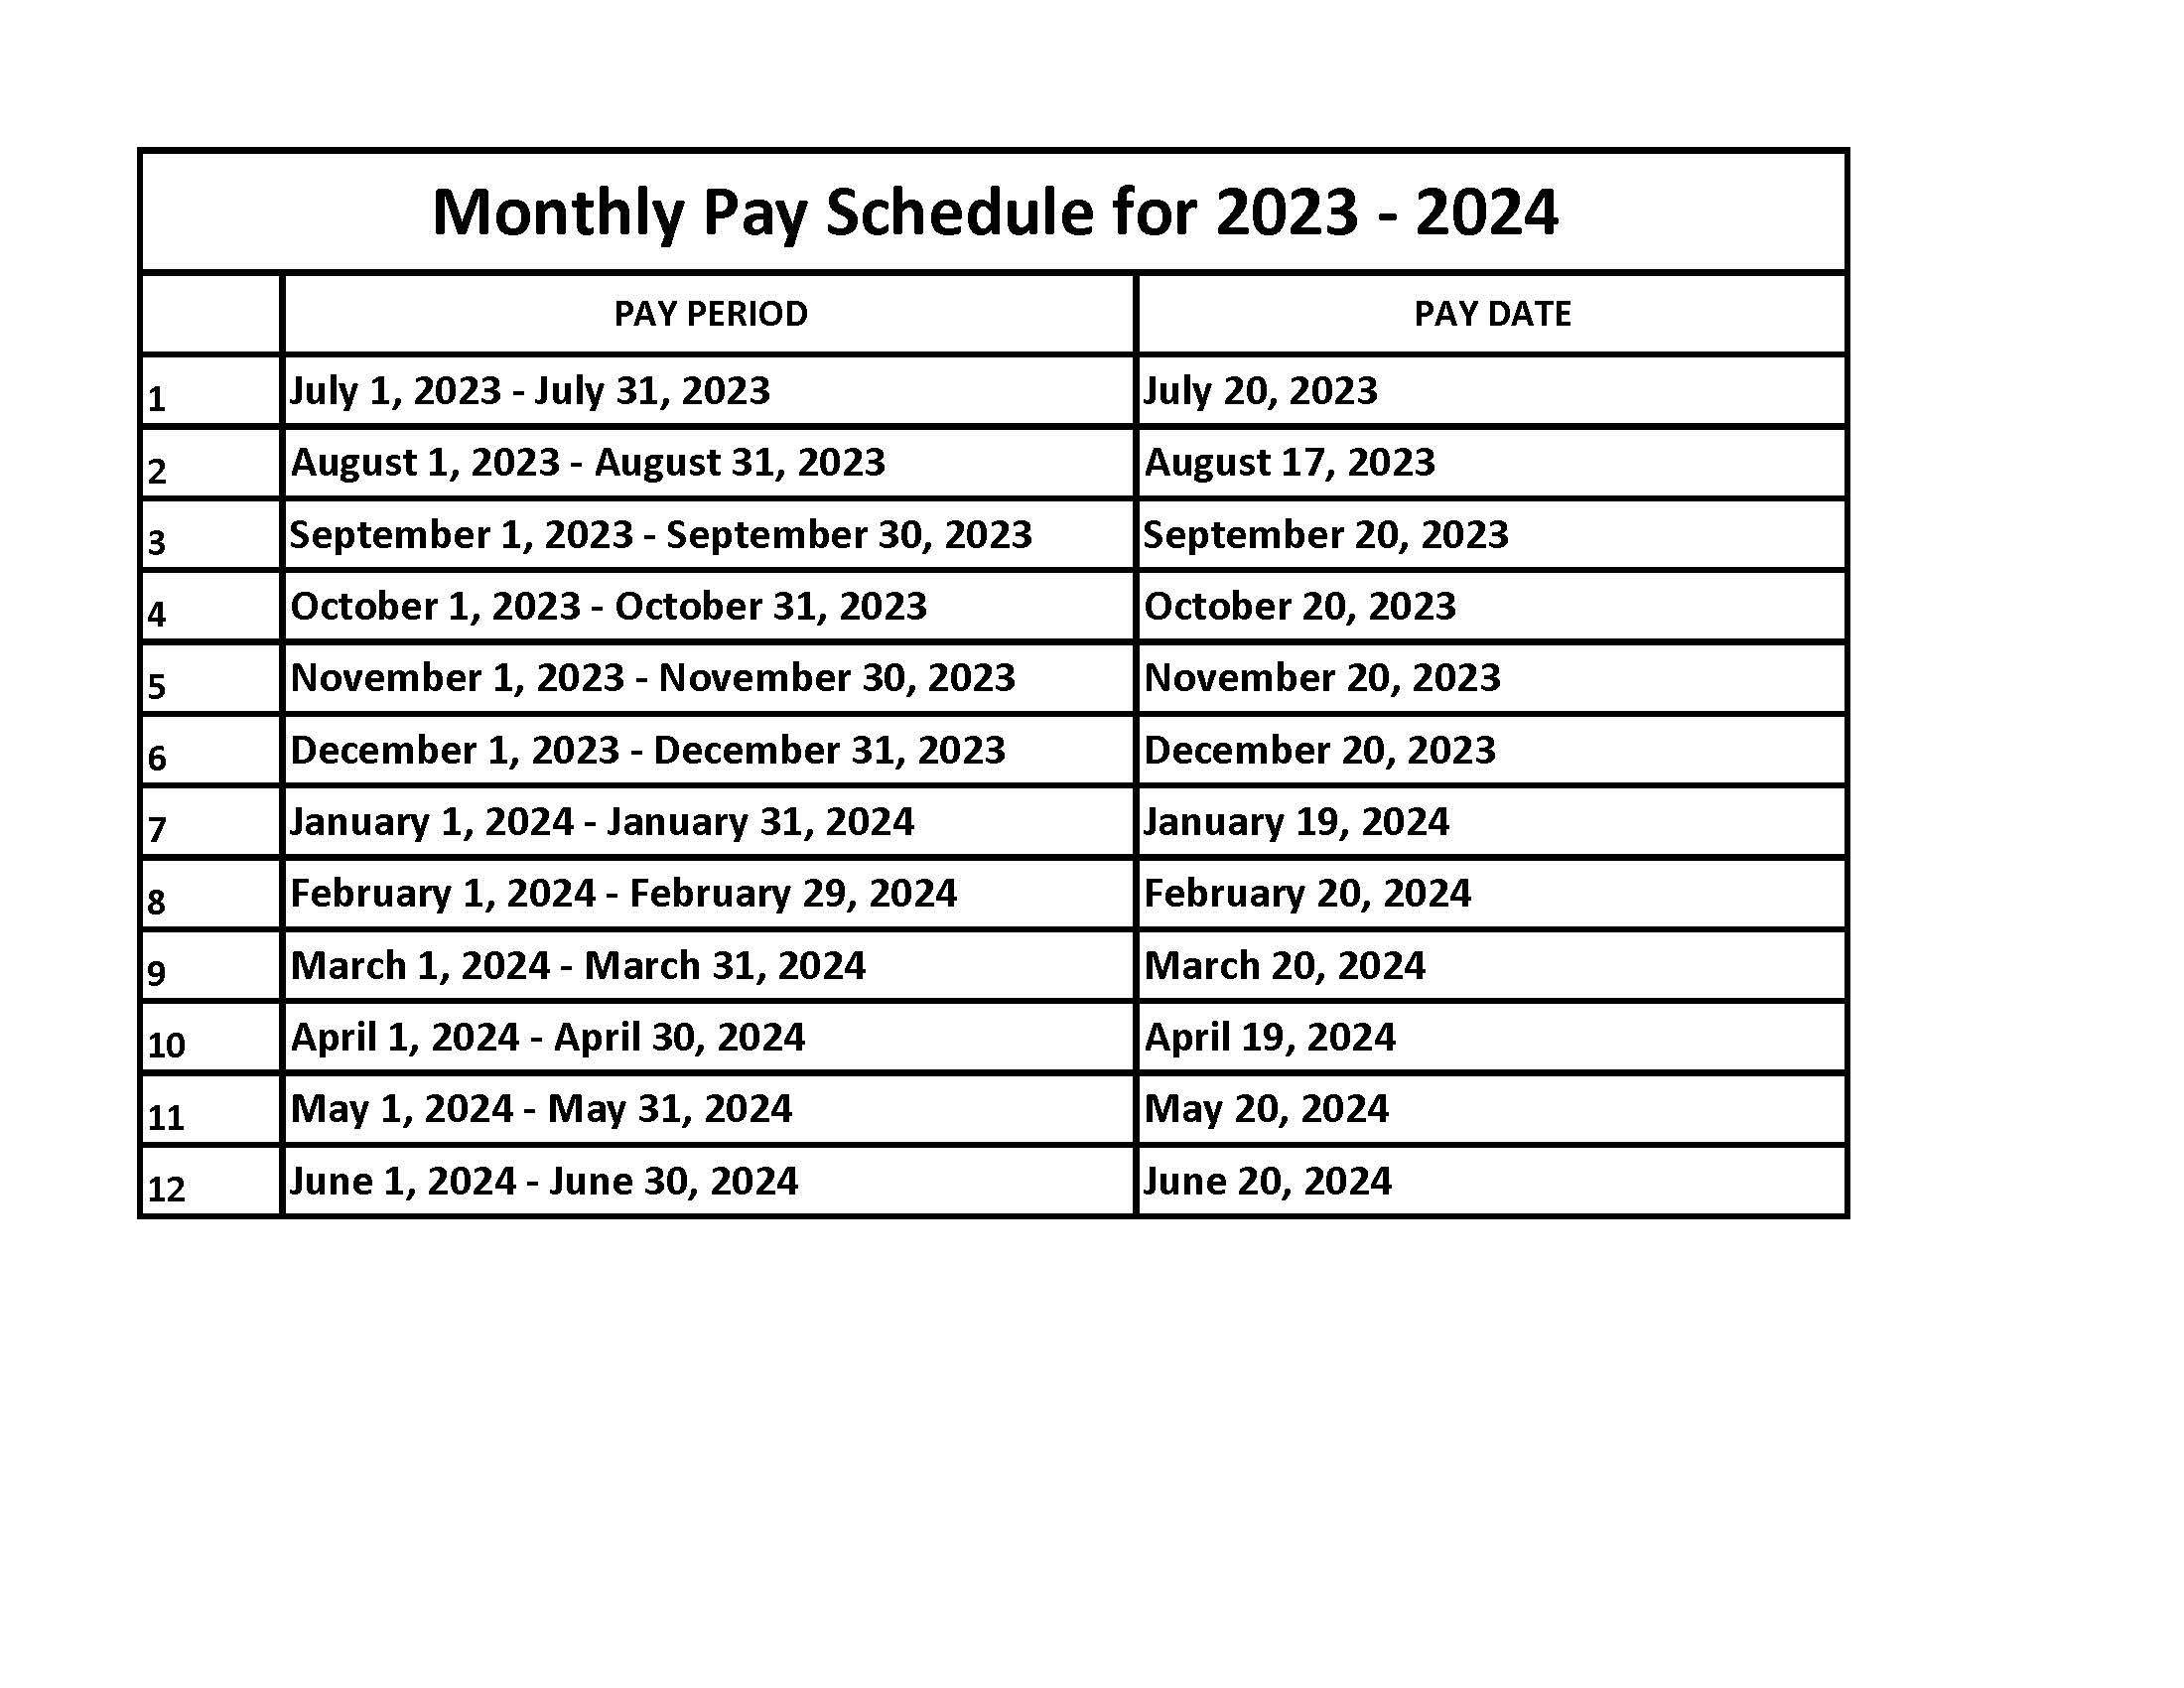 2023-2024-Monthly-Pay-Schedule